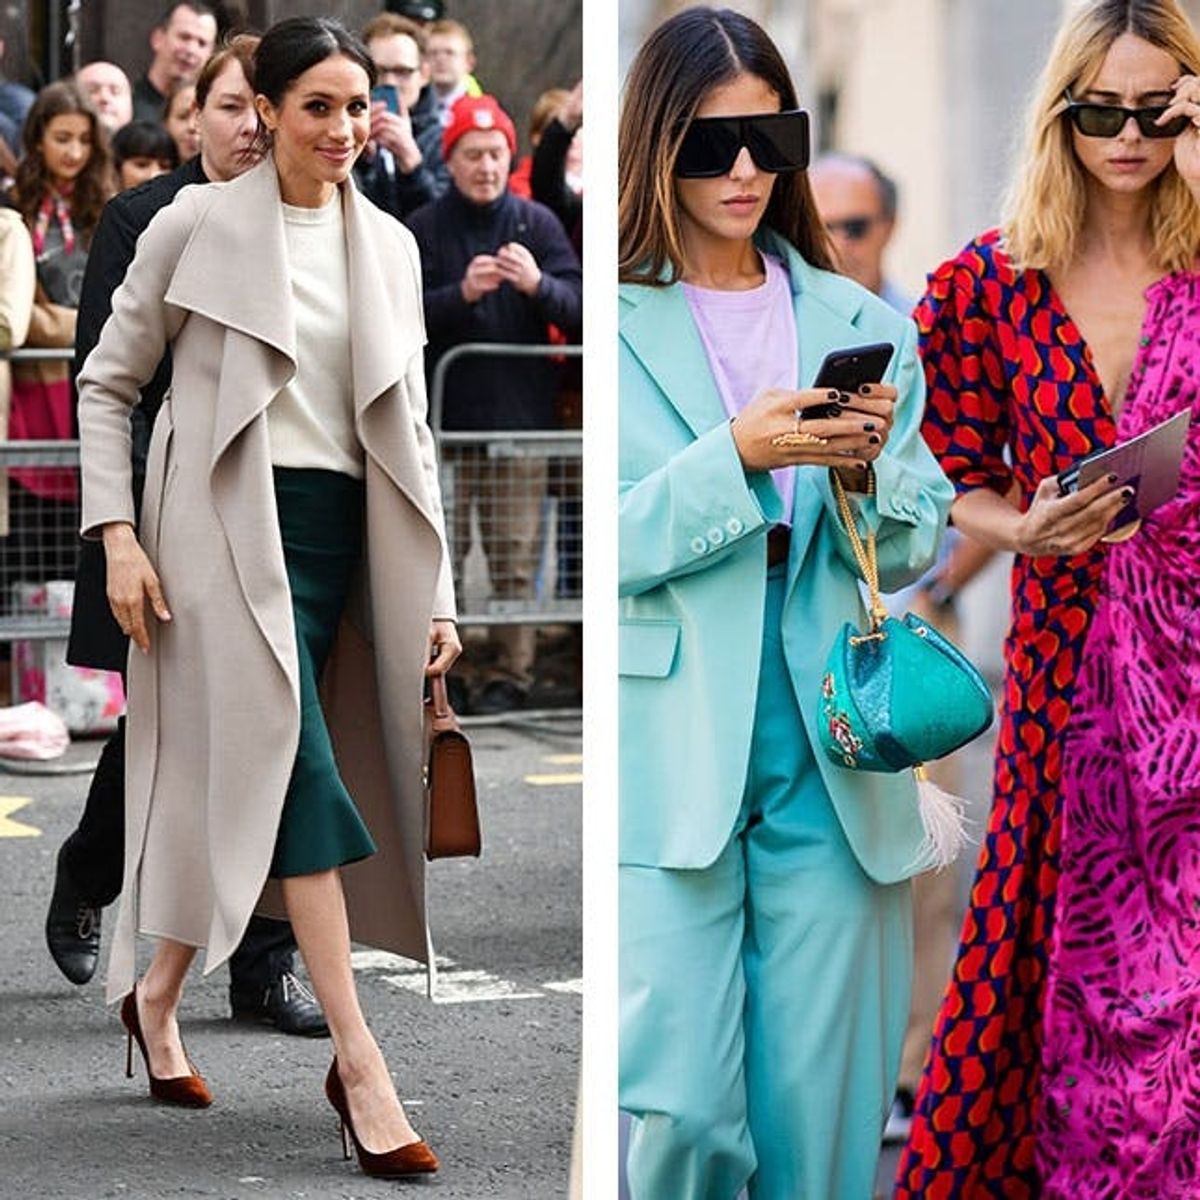 Google’s Top Trending Fashion Searches of 2018 Might Shock You - Brit + Co